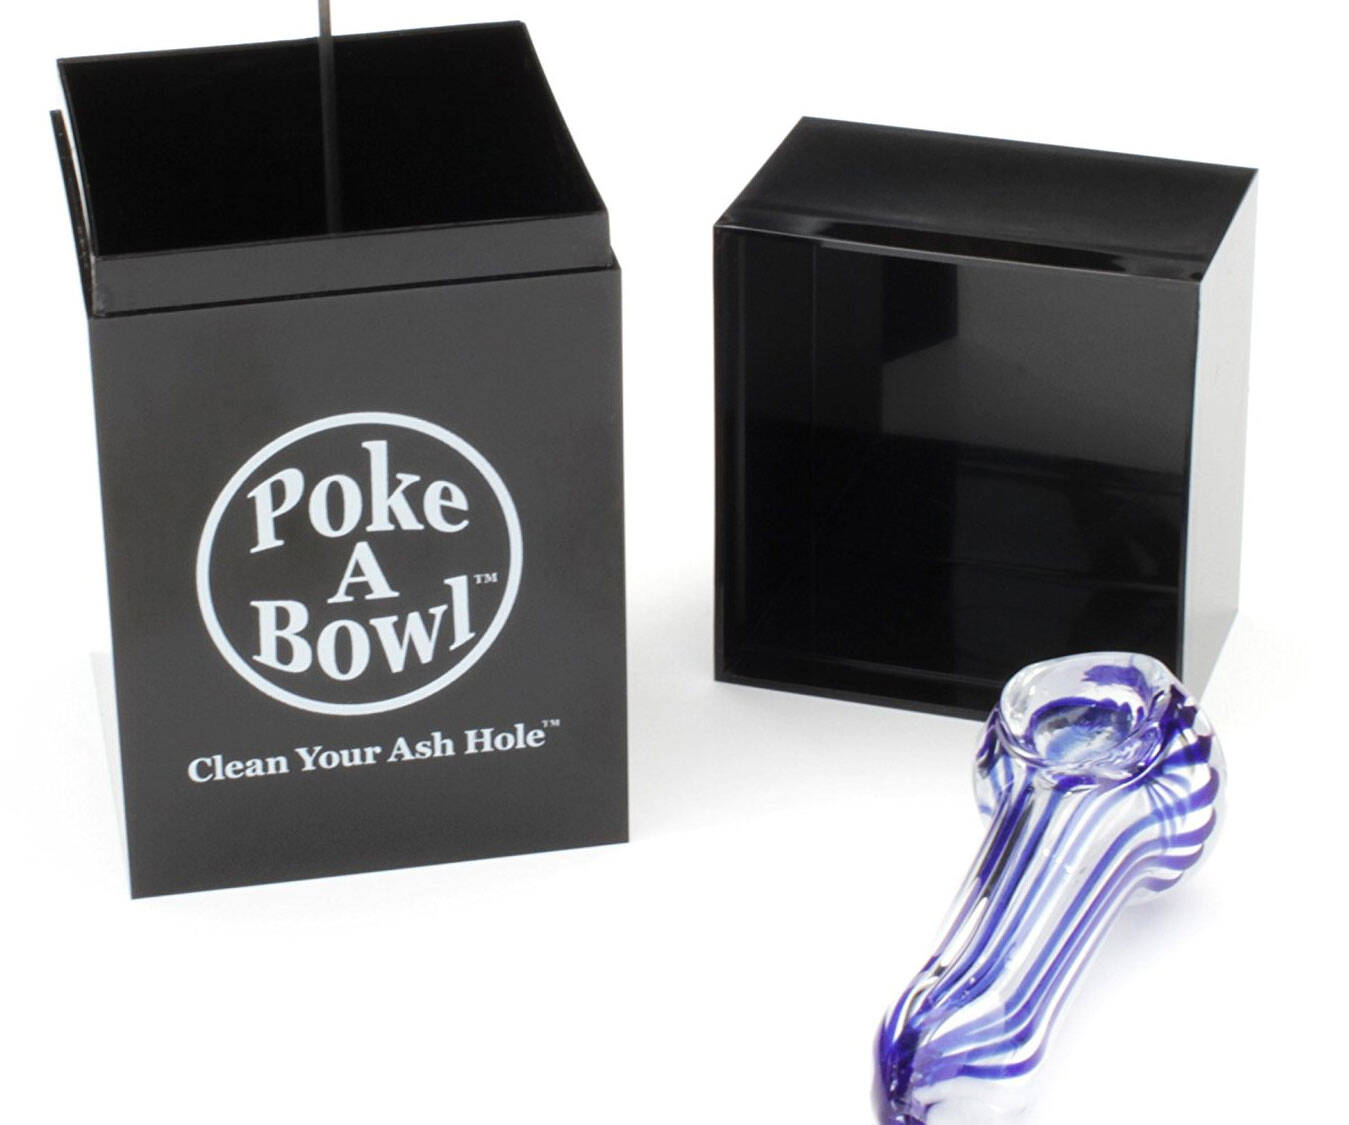 Poke A Bowl Clean Your Ash Hole Ashtray - coolthings.us